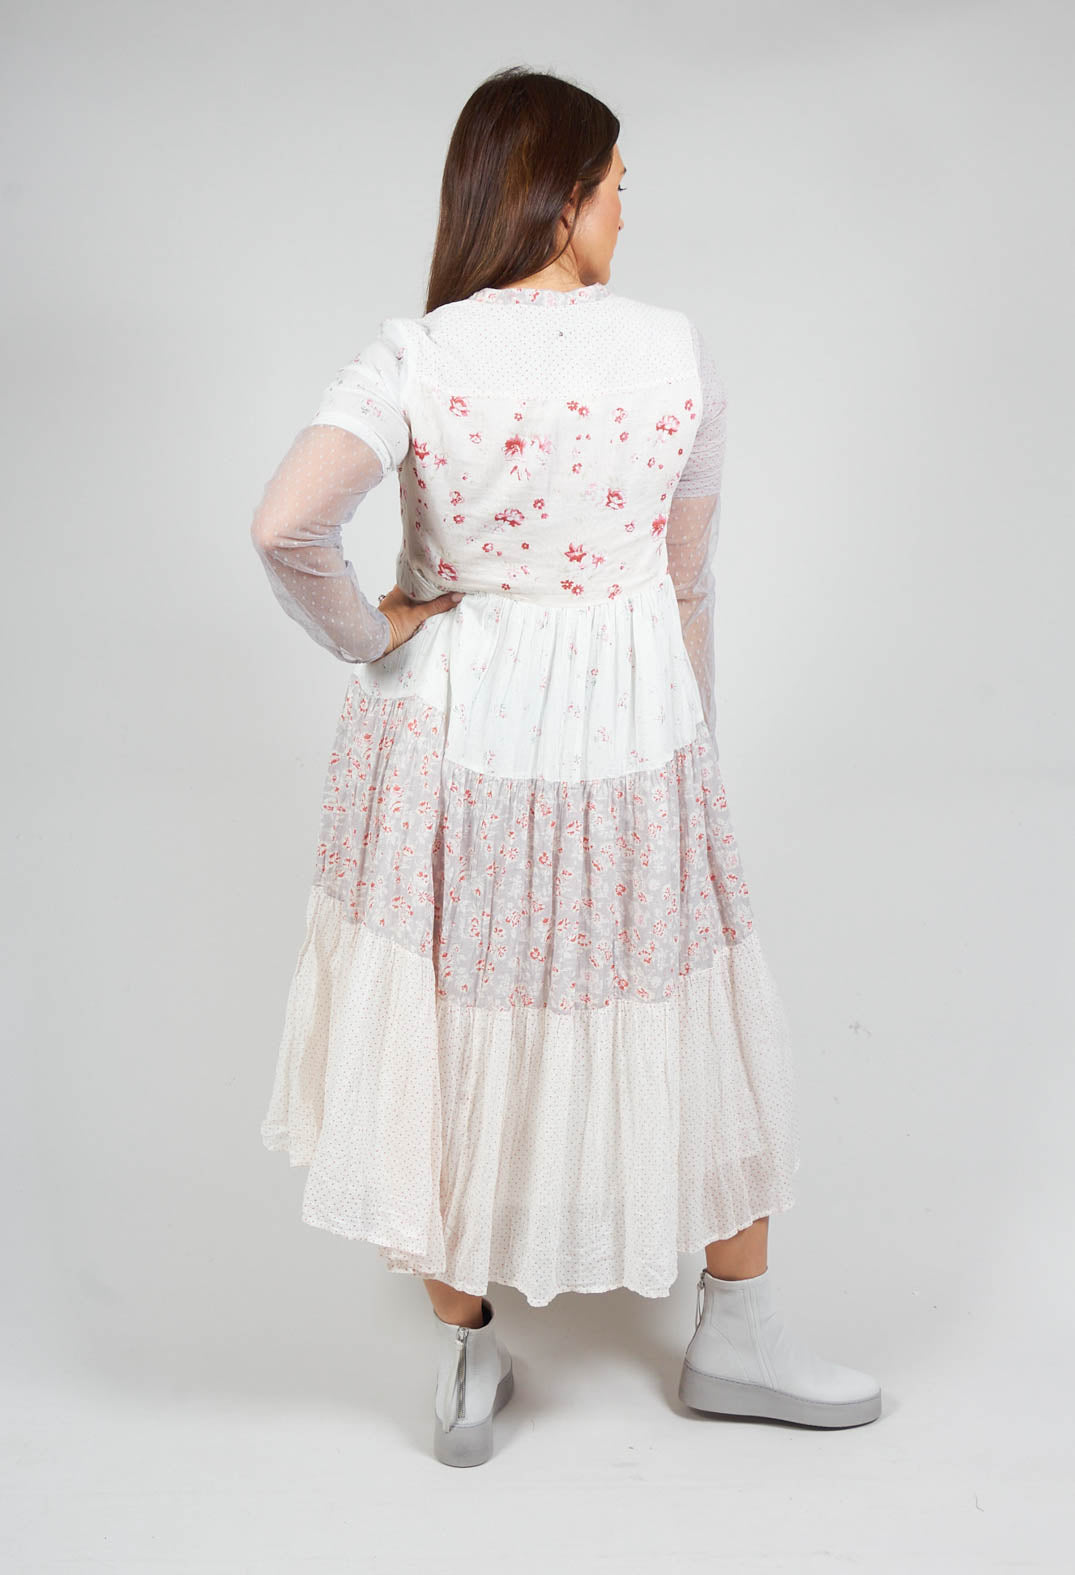 Syrine Dress with Patchwork Fabric in Patch